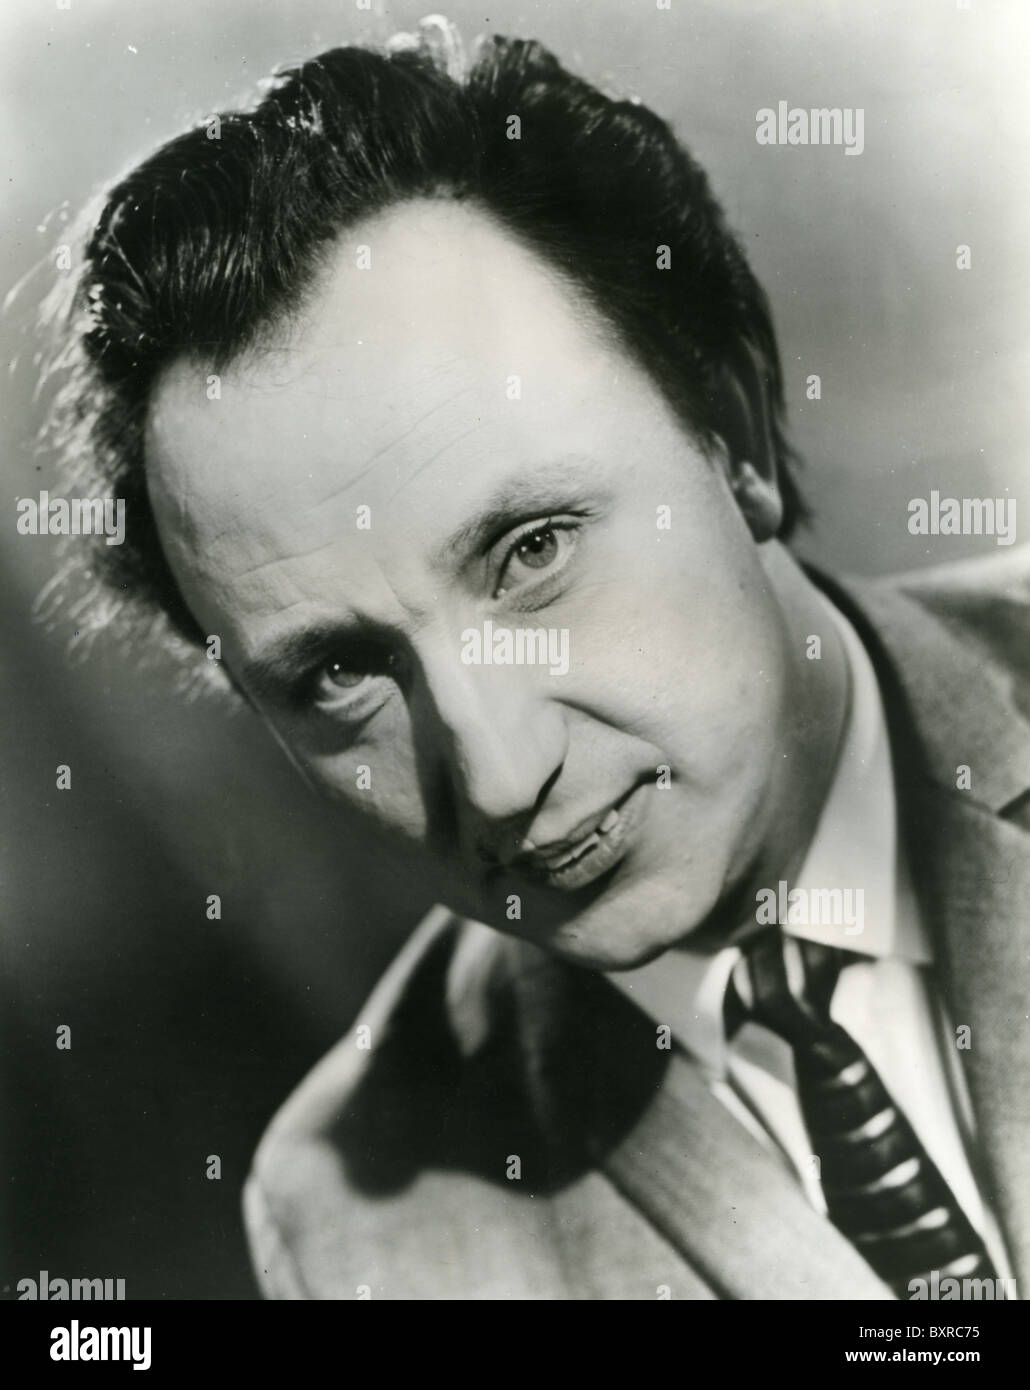 KEN DODD  Promotional photo of UK comedian about 1970 Stock Photo